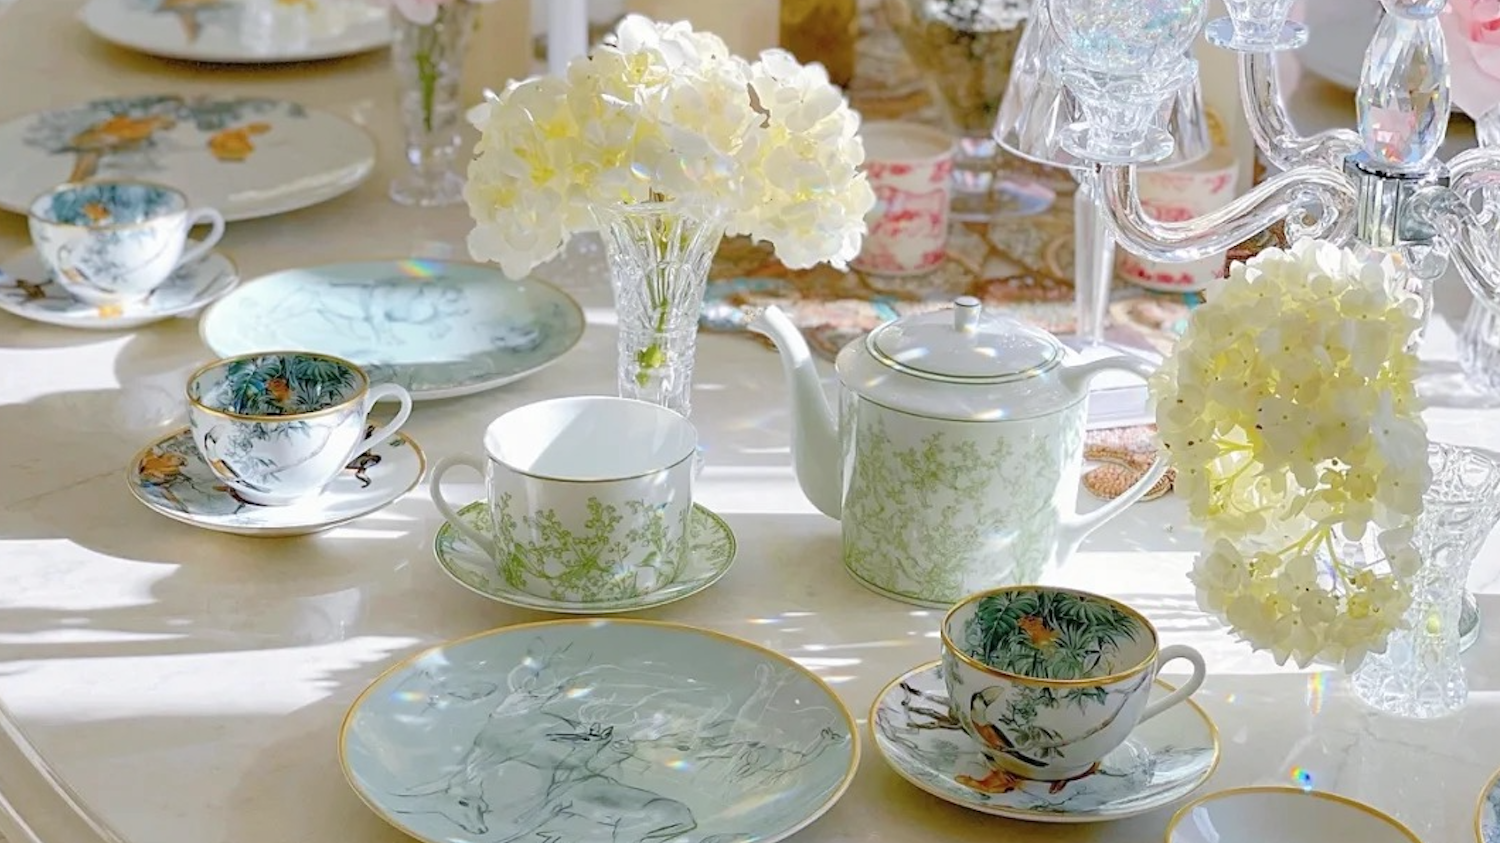 Meet the six mega homeware-wellness KOLs who are acting as trend catalysts, shaping consumer perceptions and influencing purchase decisions. Photo: Xiaohongshu screenshot